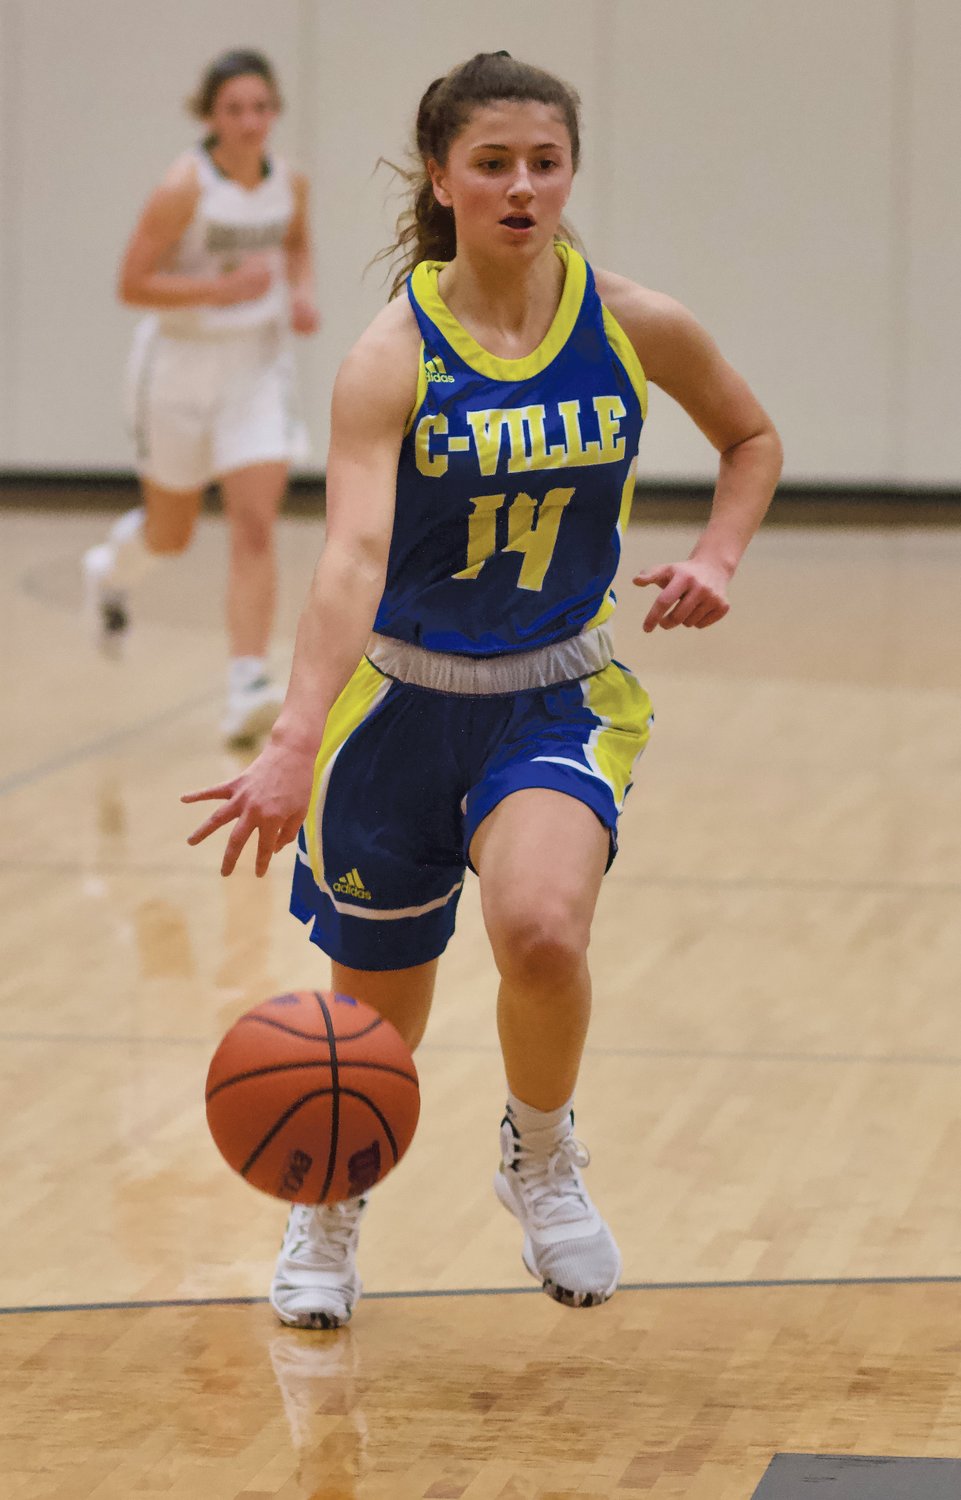 Crawfordsville's Shea Williamson reached double-figures with 13 points in the Athenians 53-43 win over Fountain Central on Tuesday.